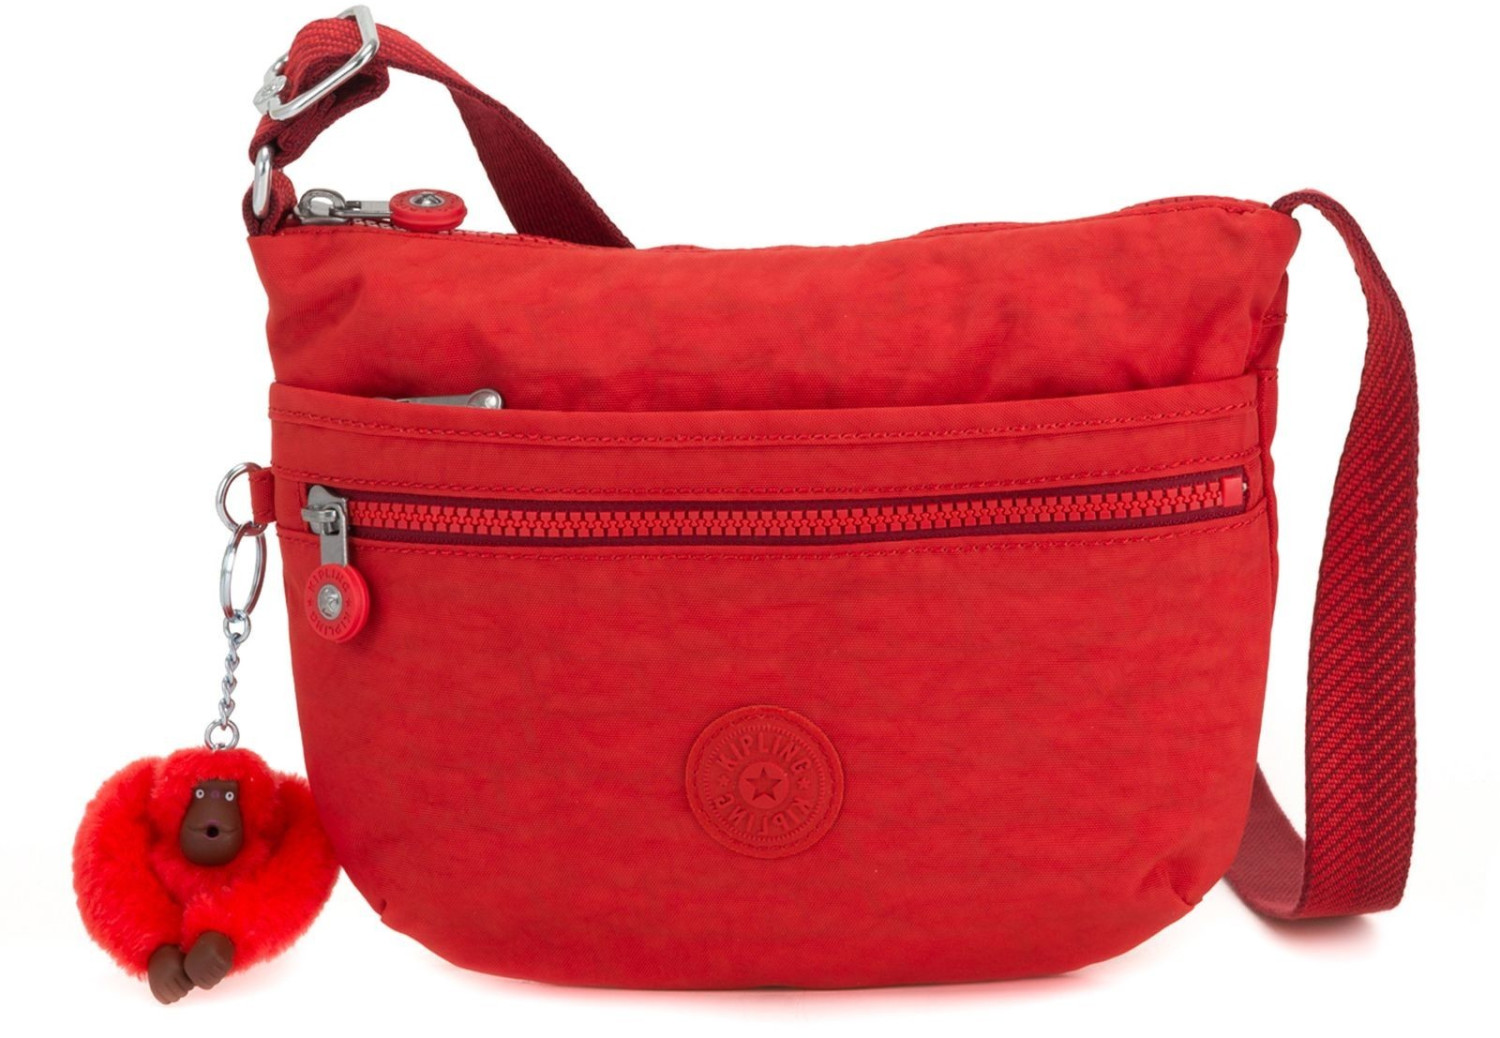 Buy Kipling Arto S active red from £49.00 (Today) – Best Deals on ...